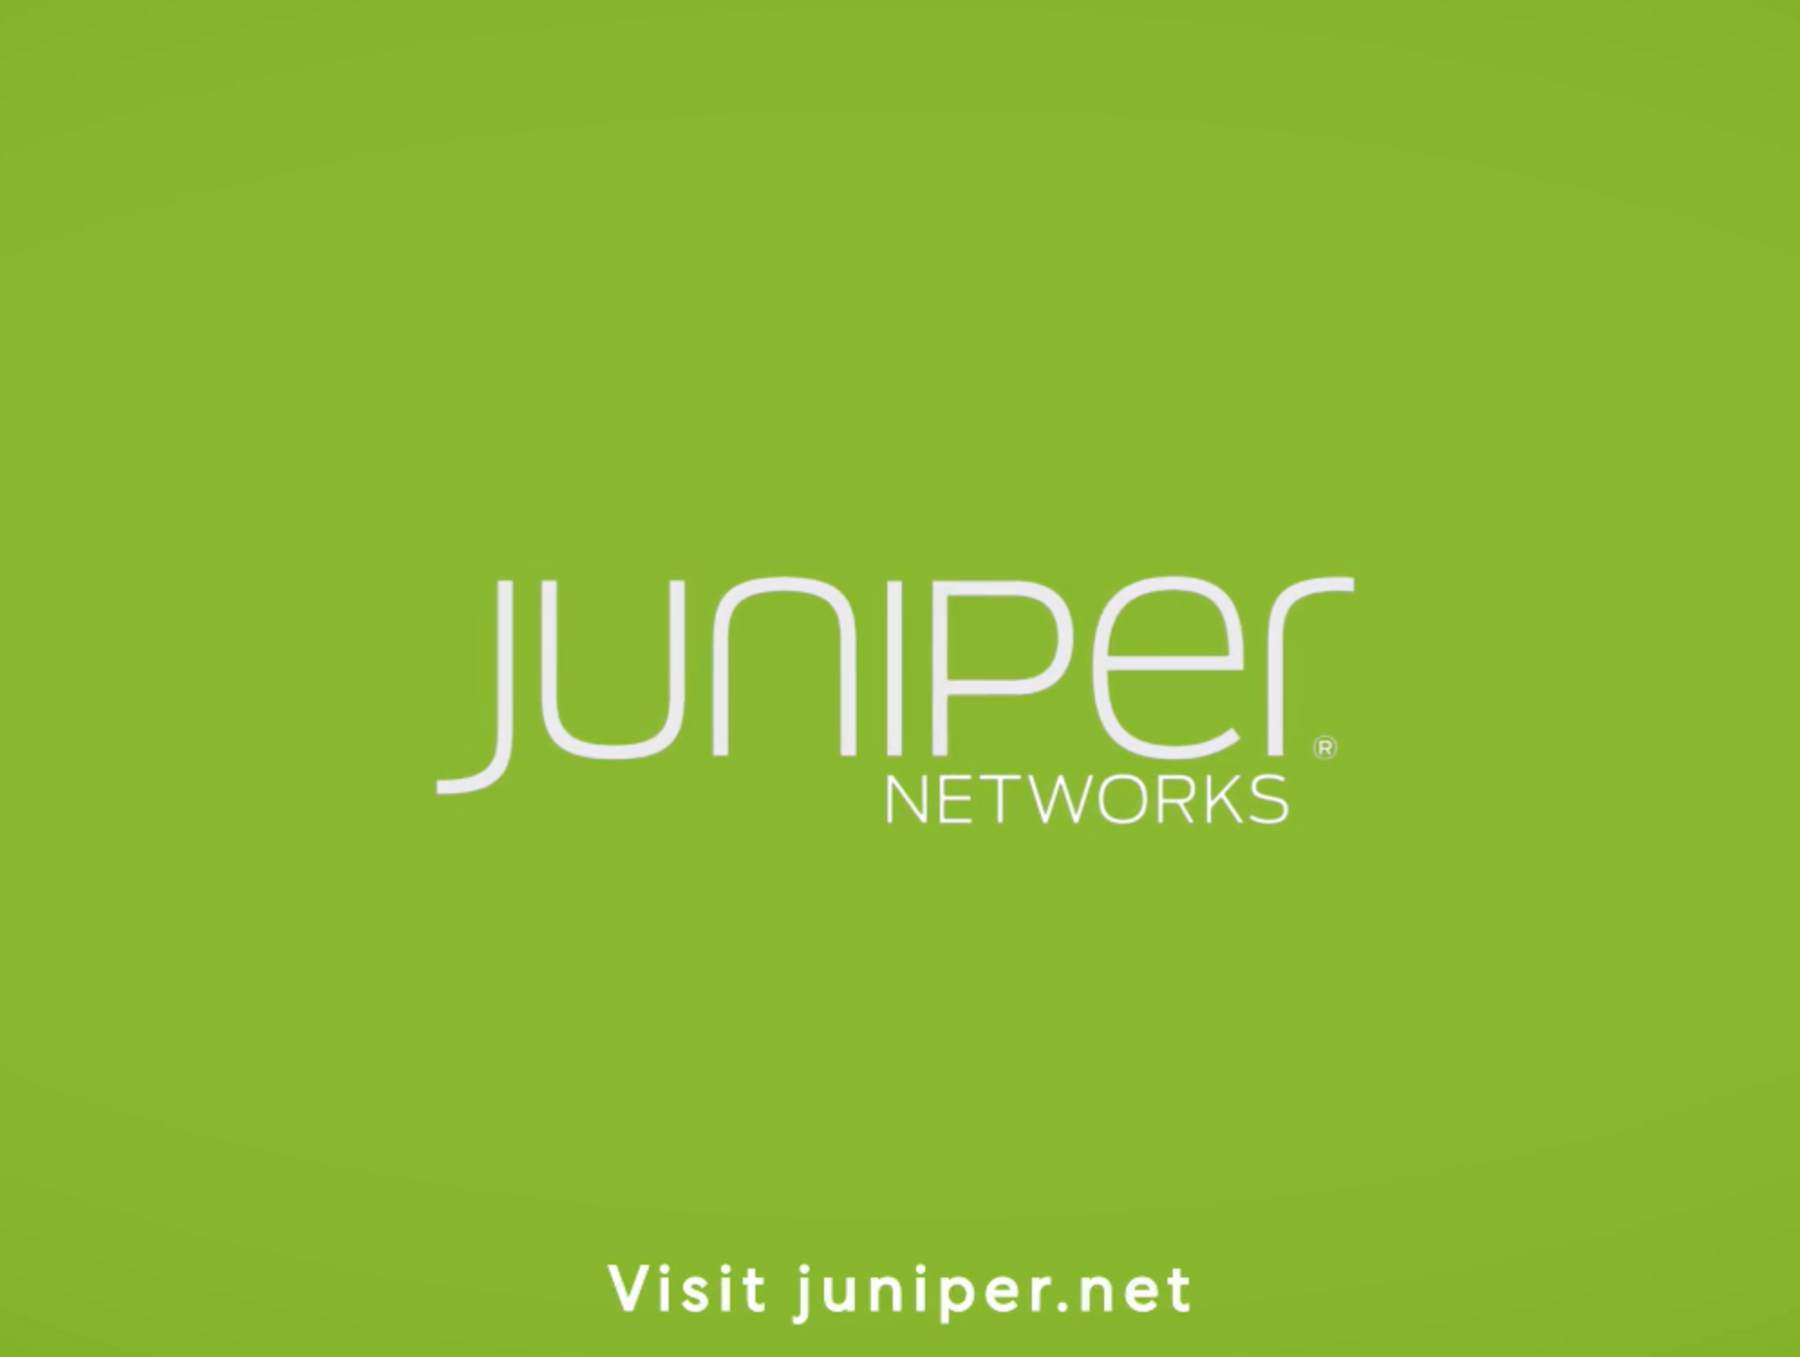 Juniper networks sourcing is mercy iowa covered under amerigroup